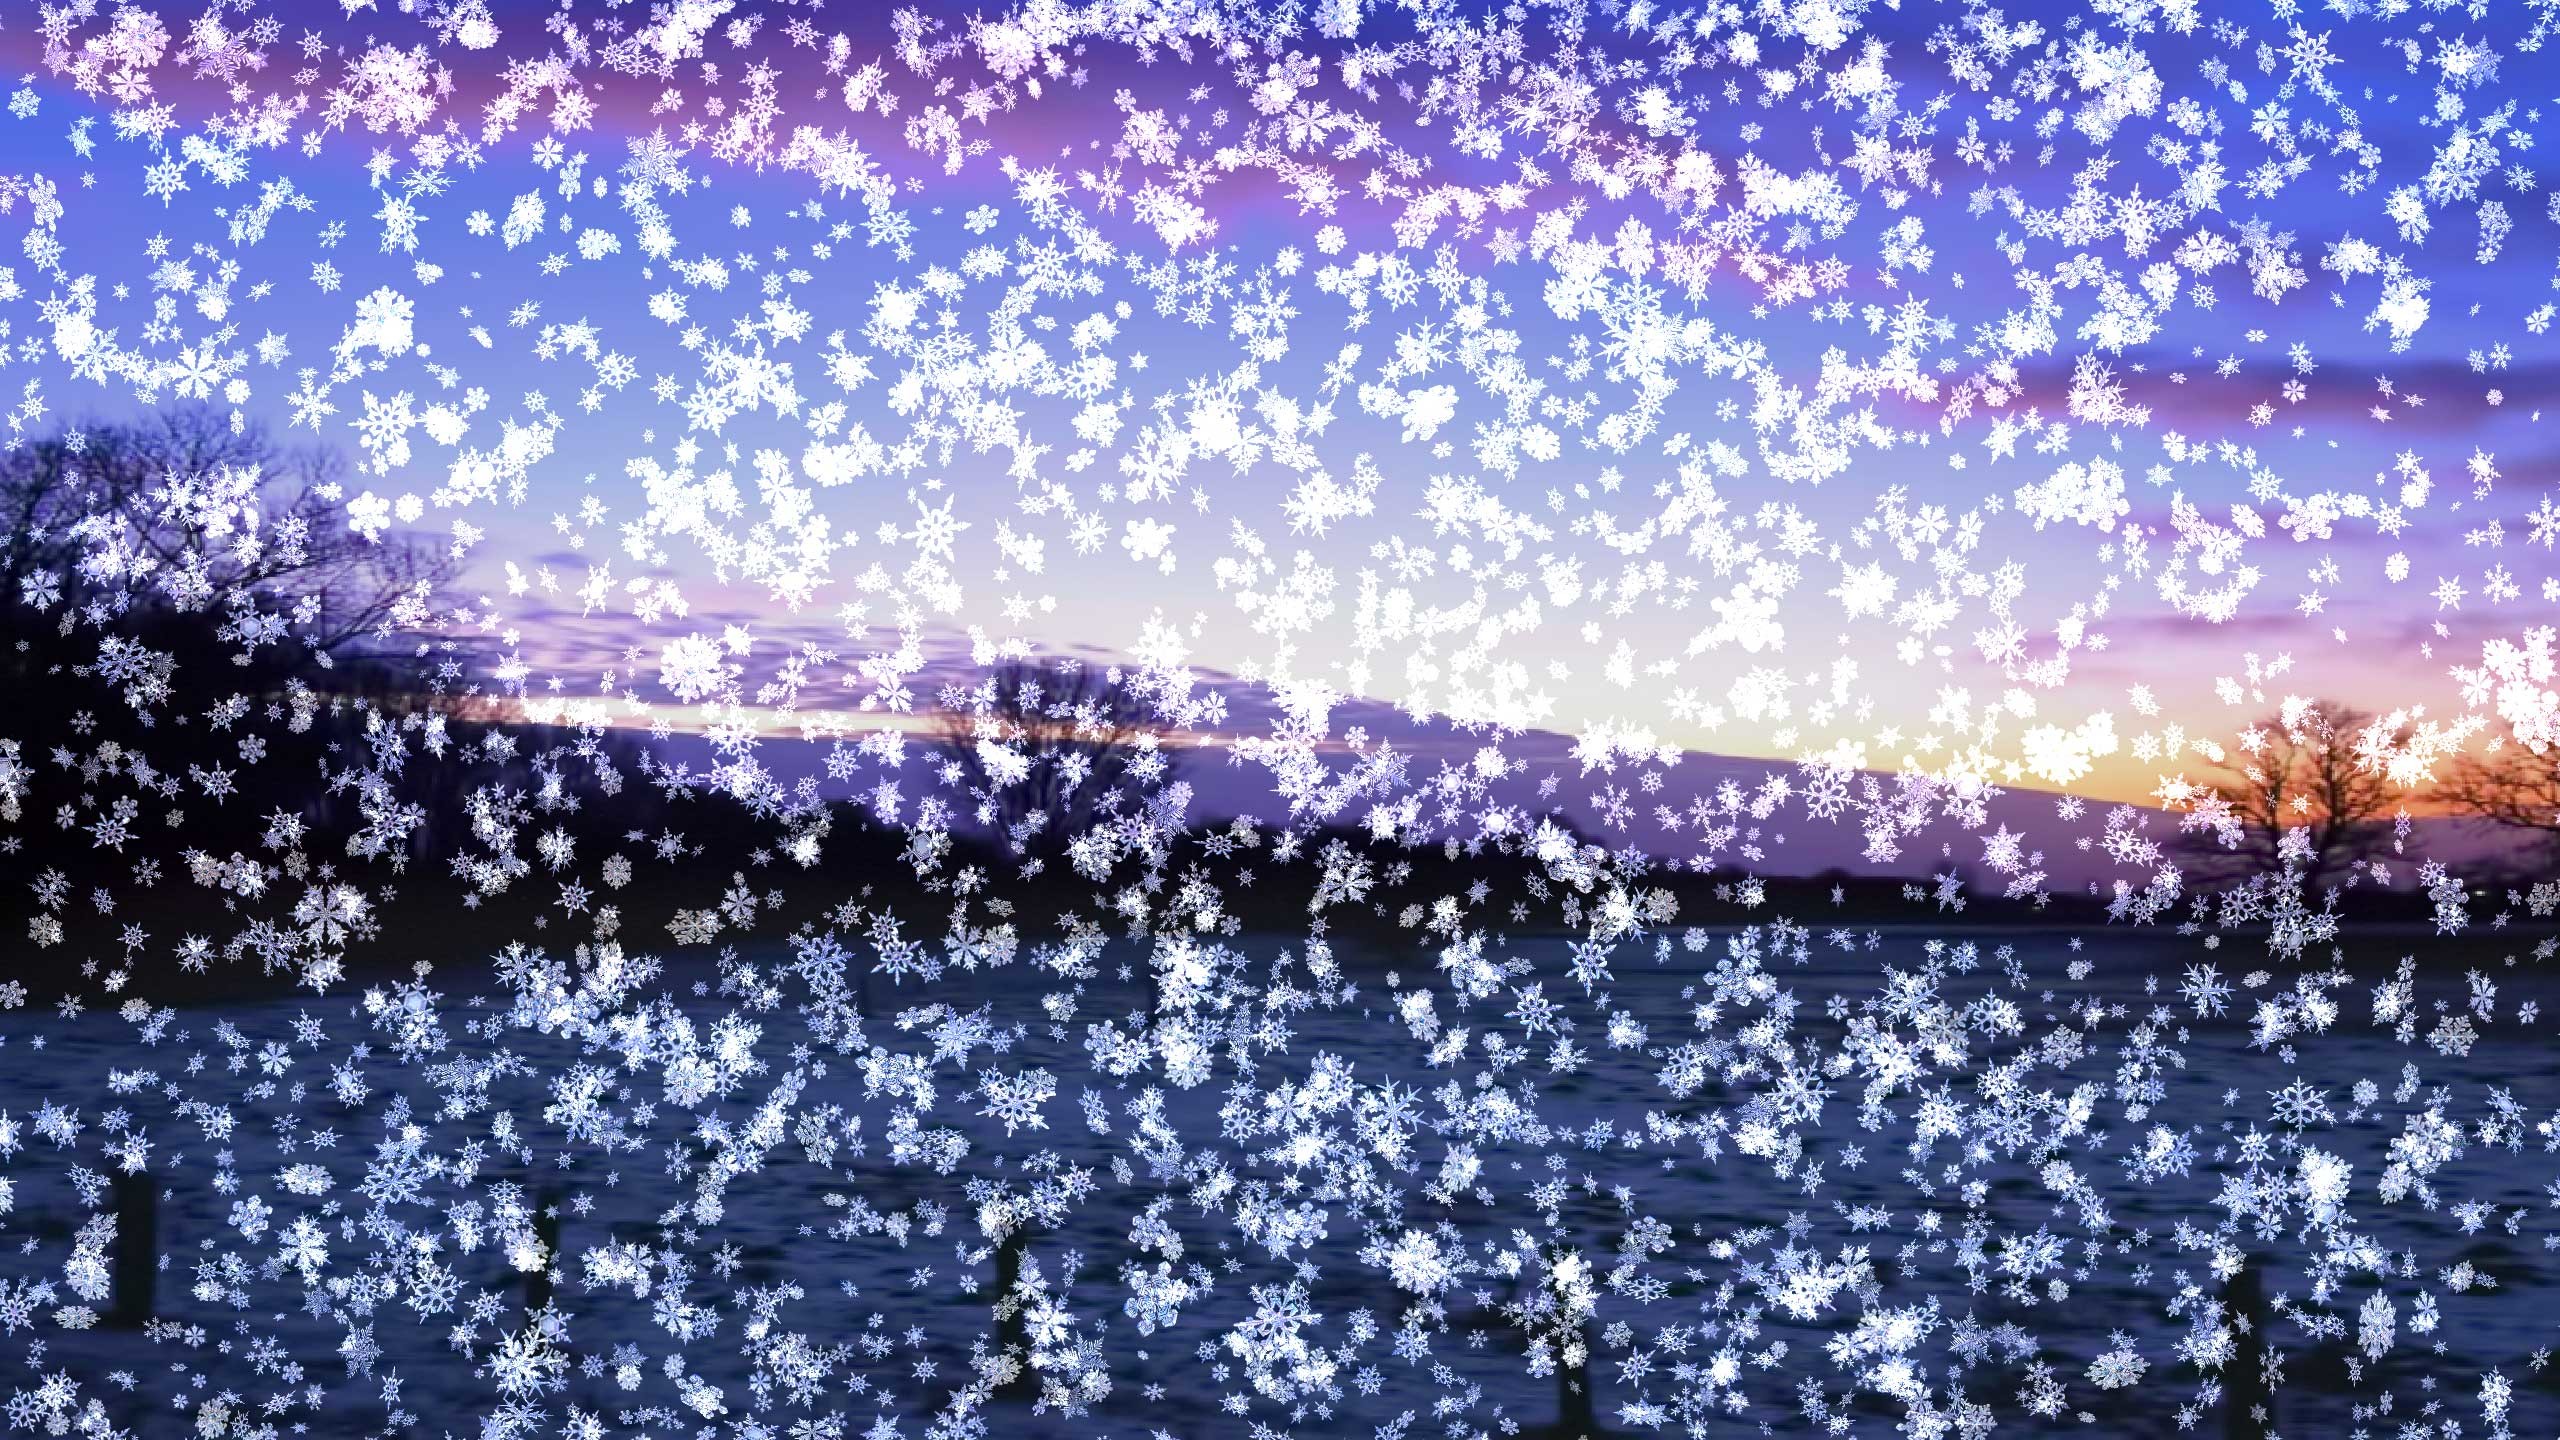 2560x1440 0 Free Wallpaper Snow Live Wallpapers and Screensavers for Windows 10,8